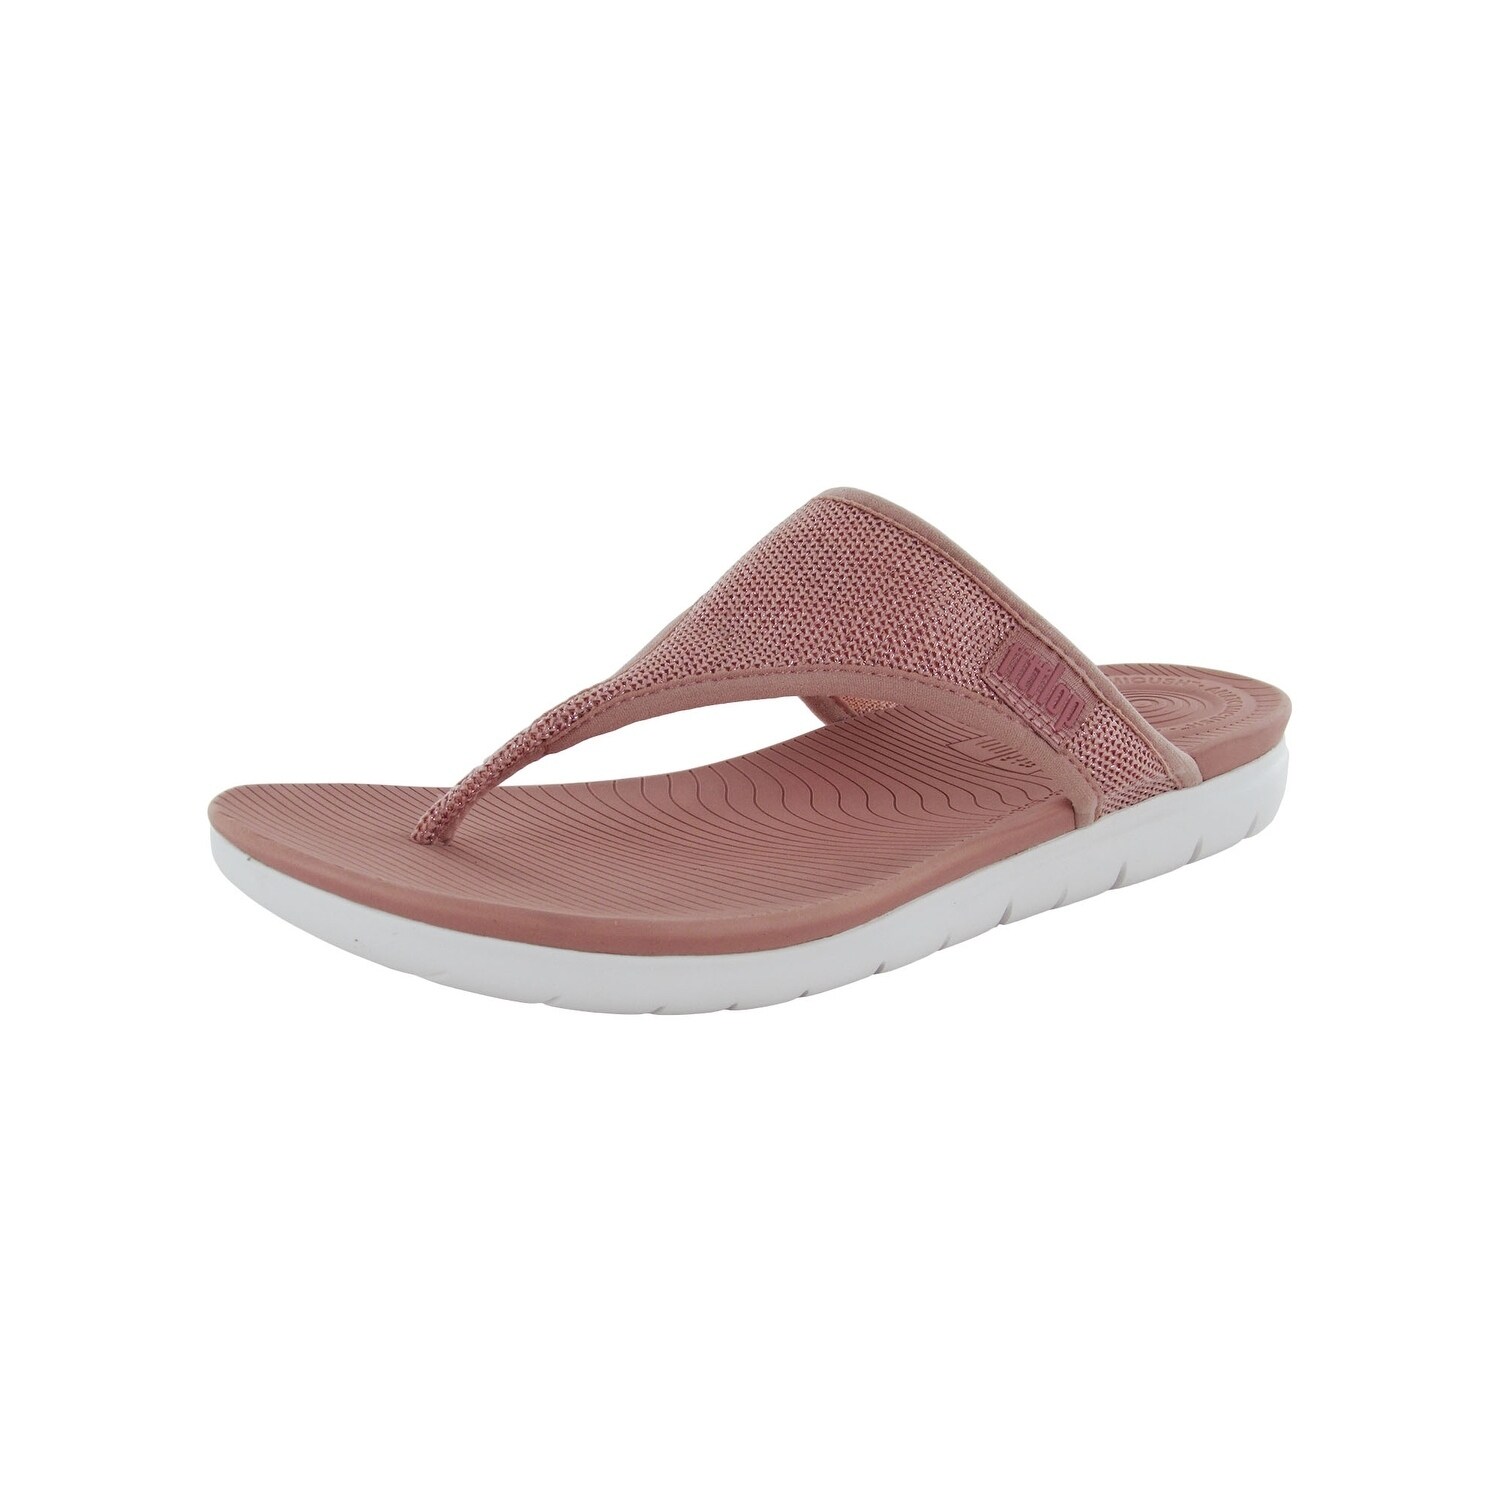 Shop Black Friday Deals on Fitflop 